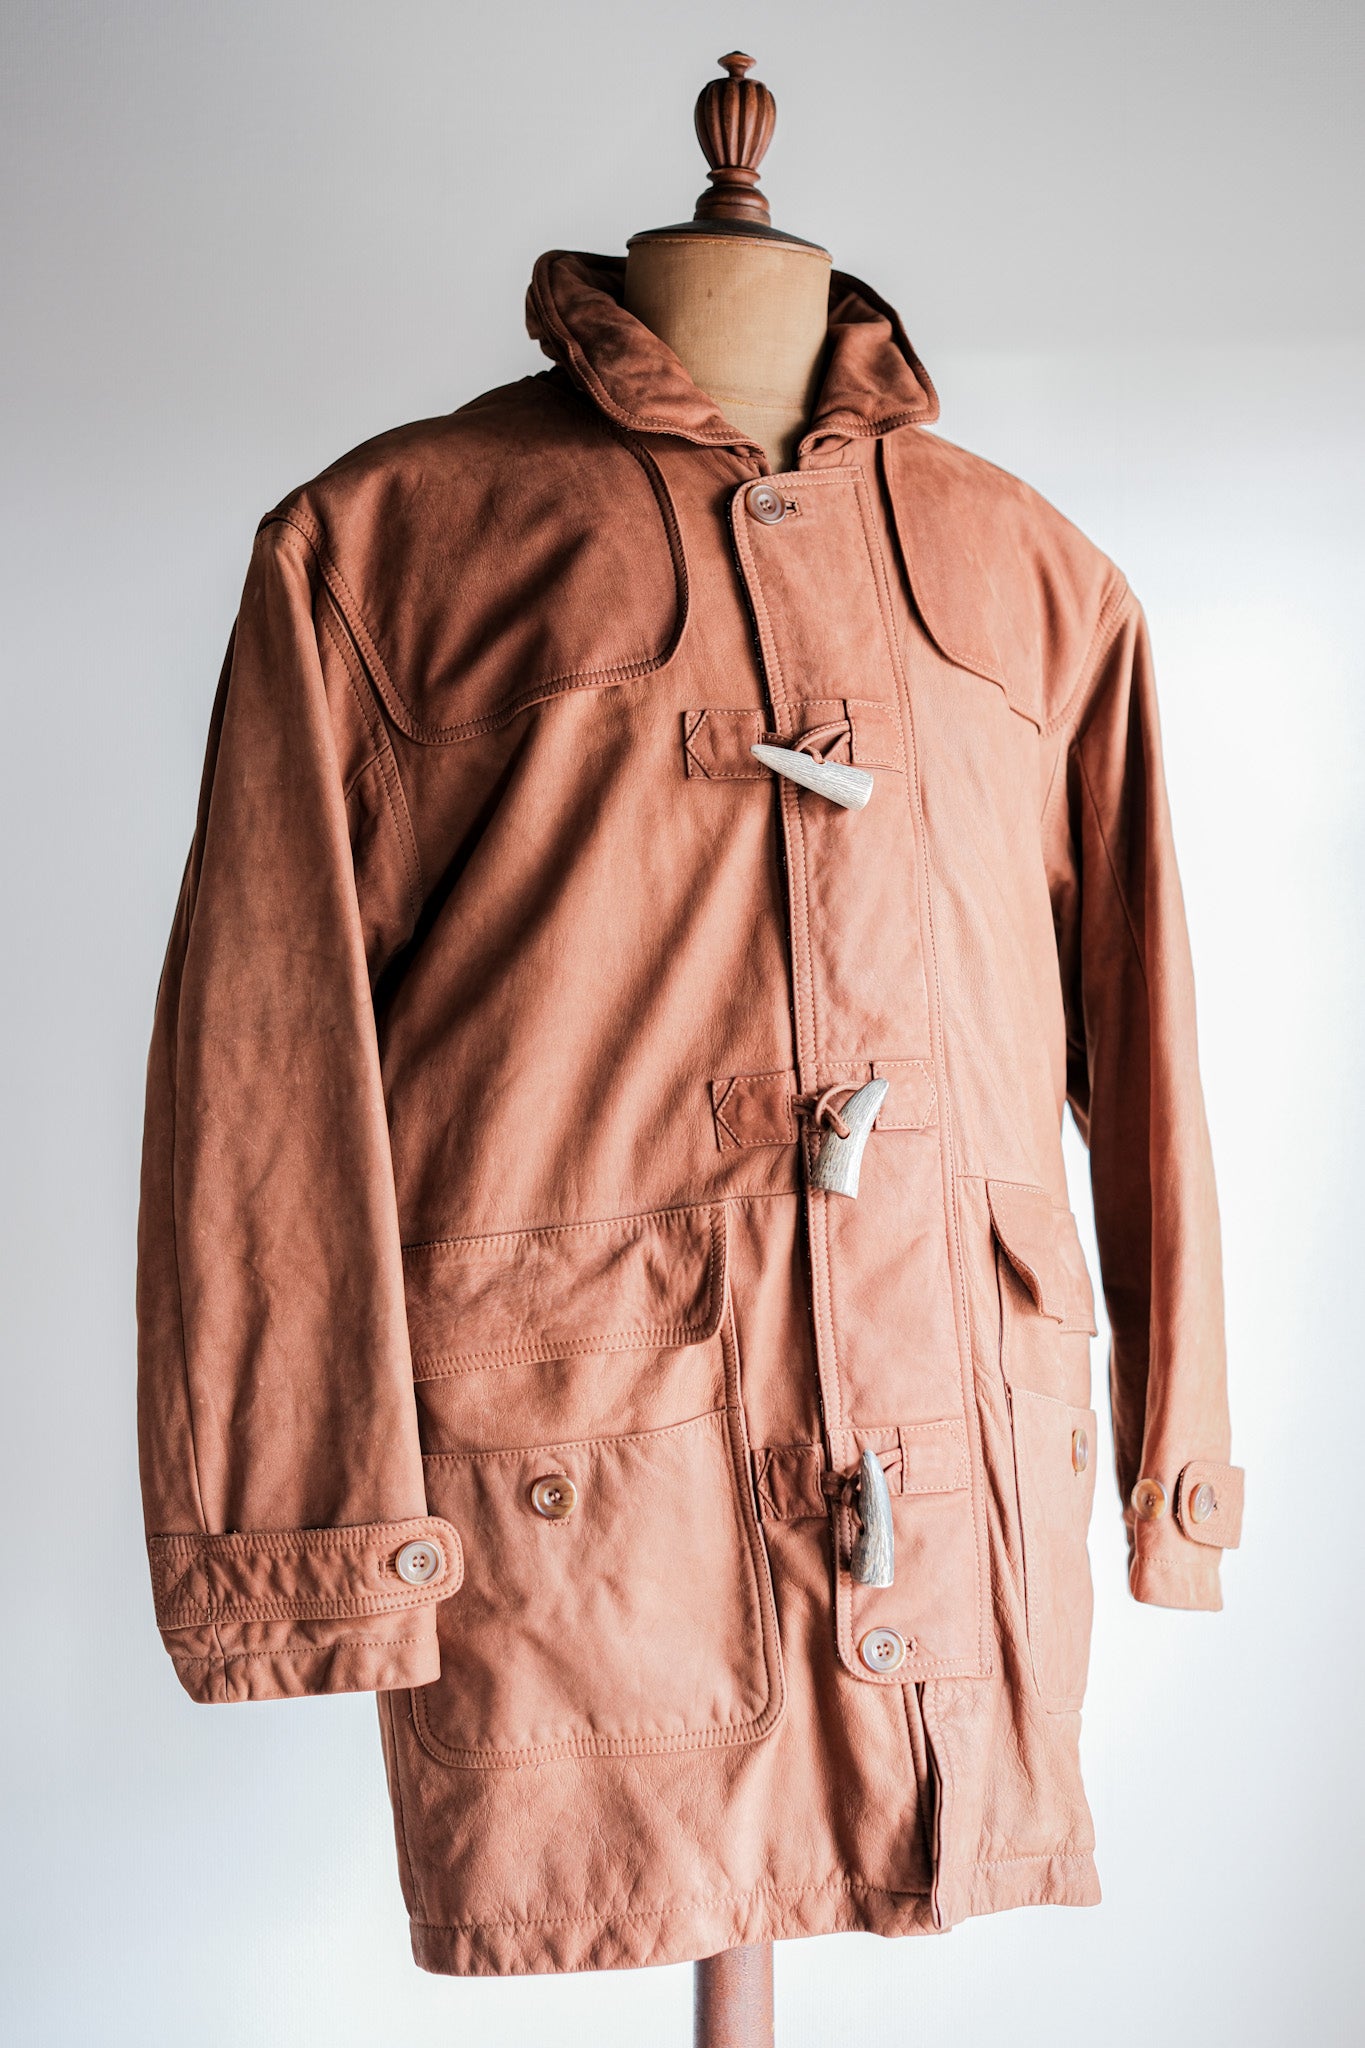 [~ 90's] Old Invertere Leather Duffle Coat Size.xs